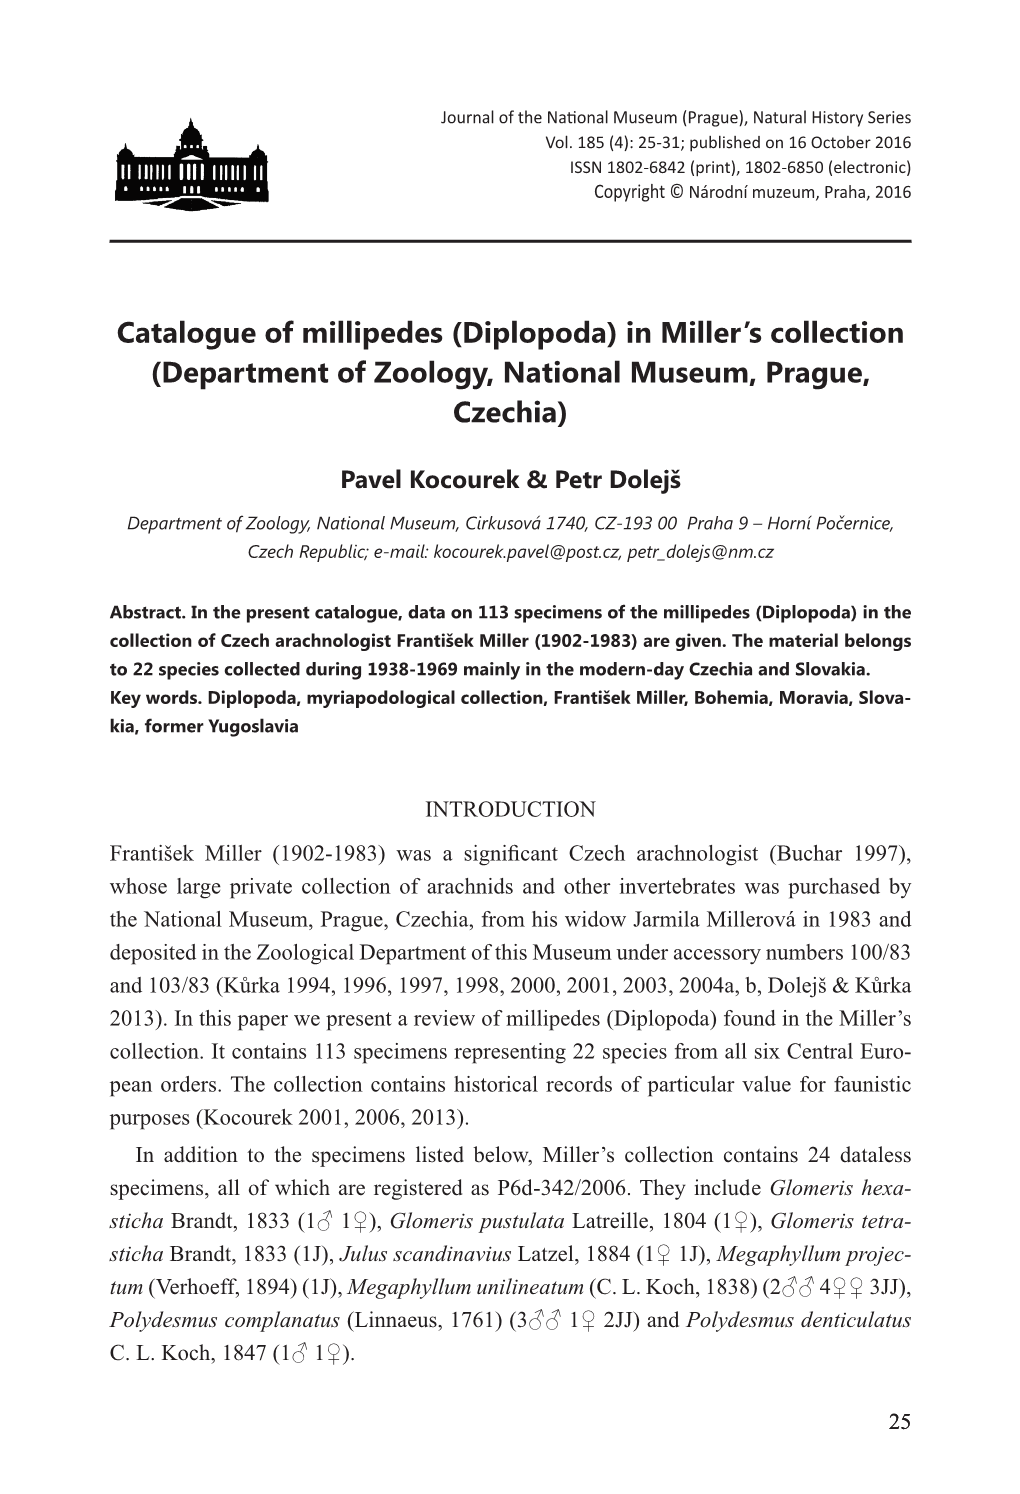 Catalogue of Millipedes (Diplopoda) in Miller's Collection (Department Of